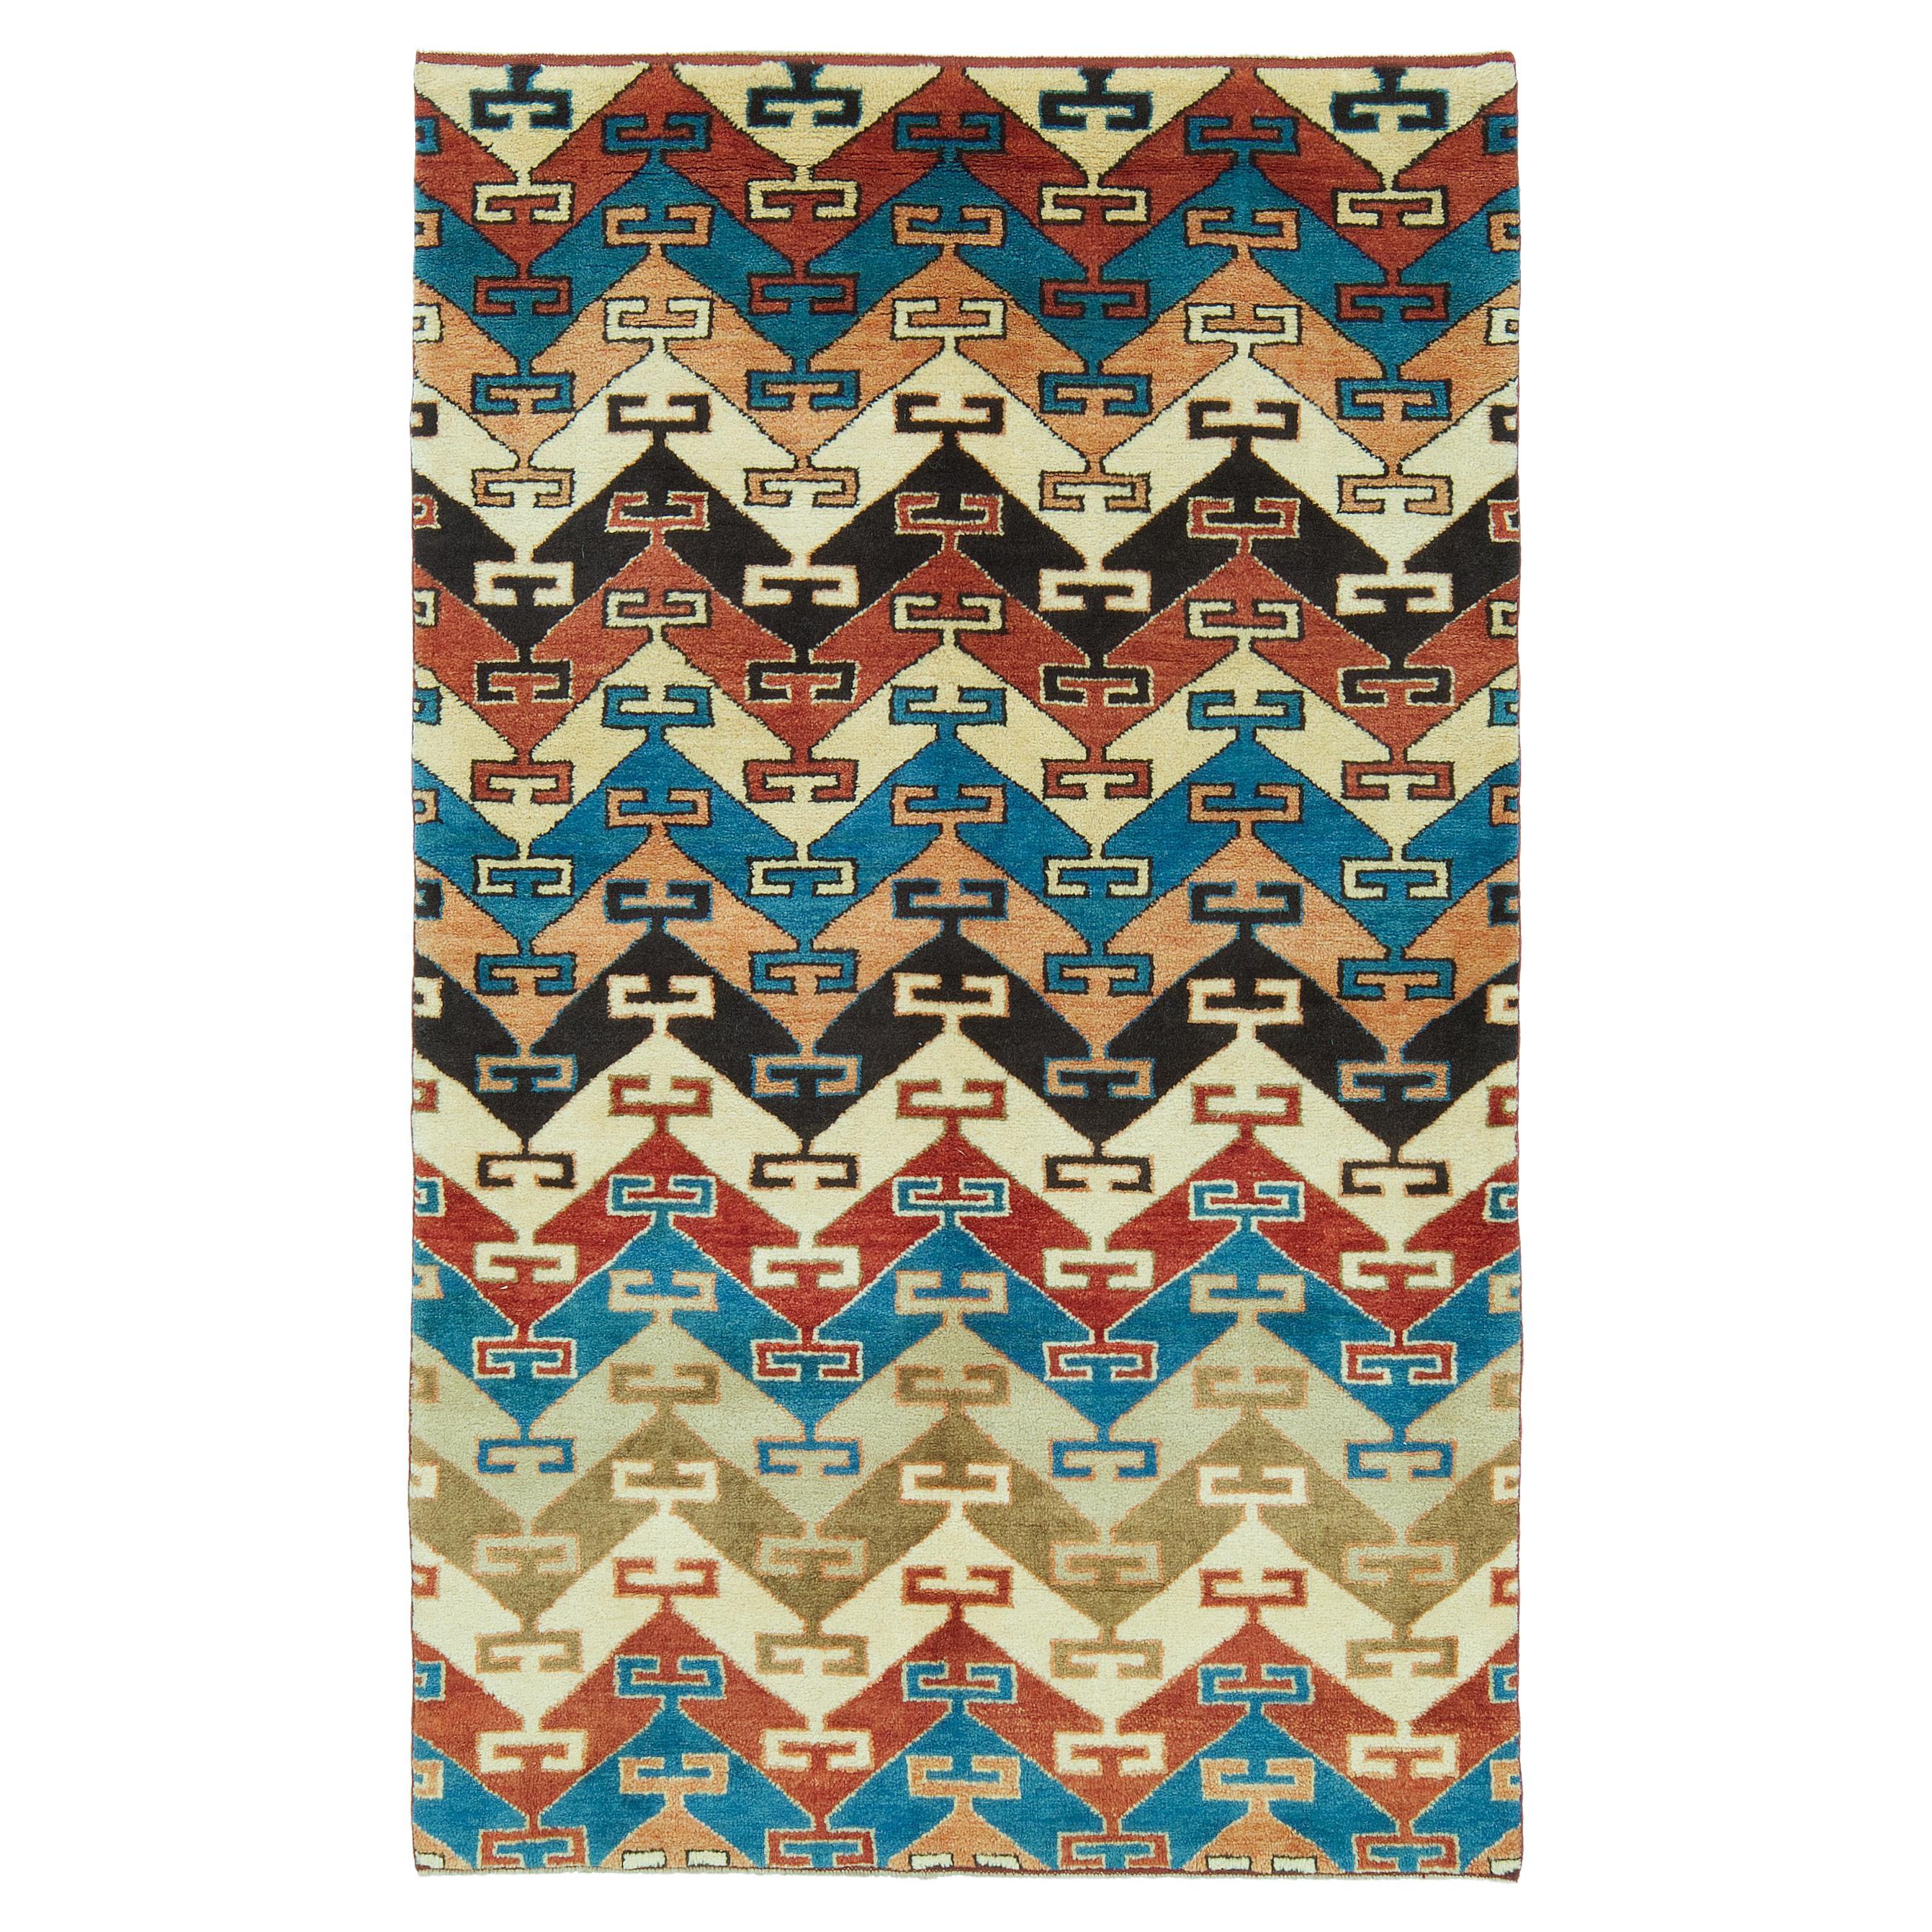 Ararat Rugs Zig-Zag Lines Rug, Antique Anatolian Revival Carpet, Natural Dyed For Sale